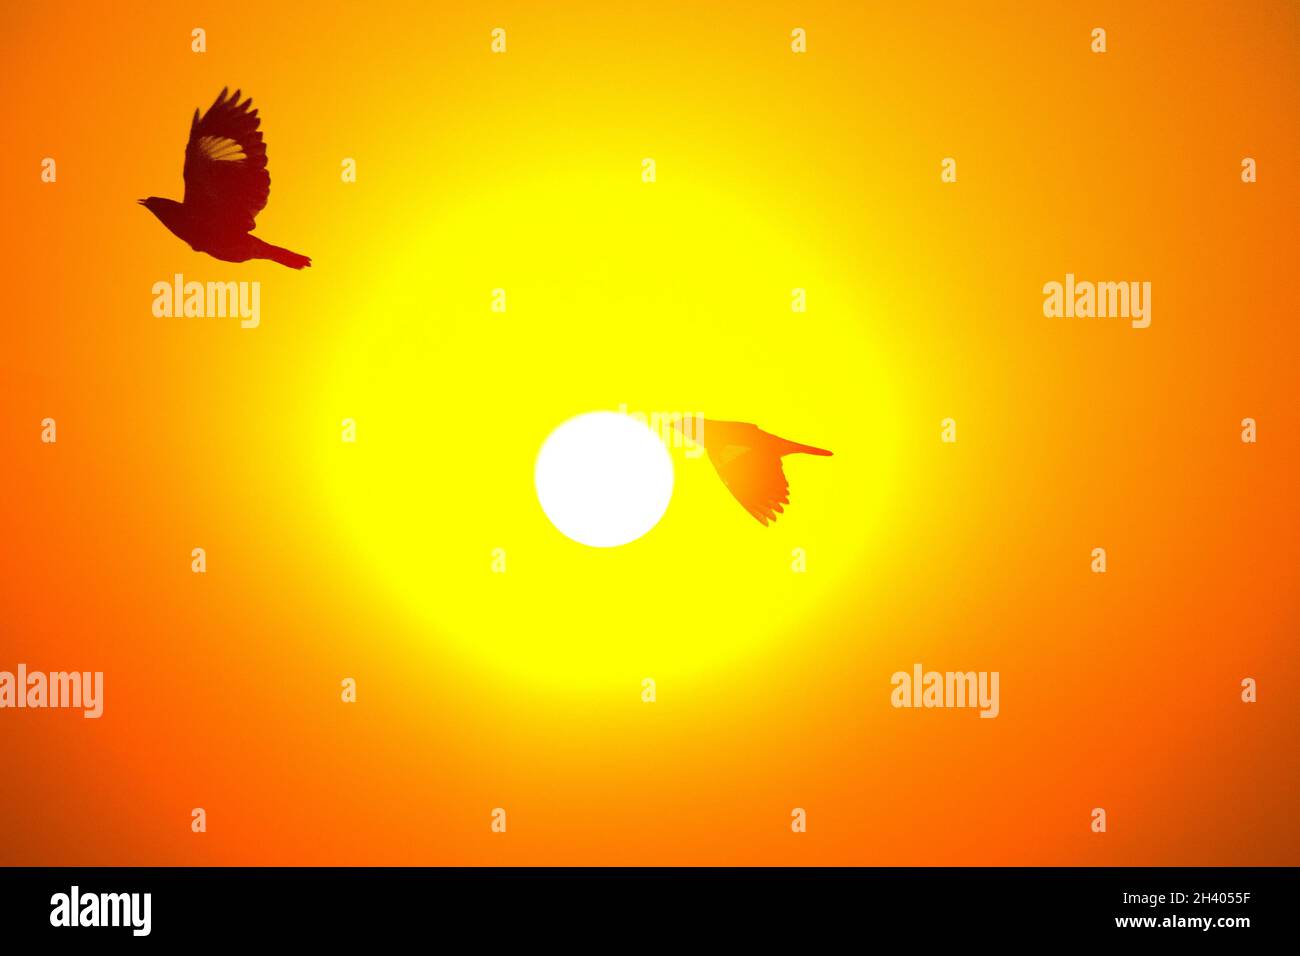 Birds fly against background of sun's disk Stock Photo